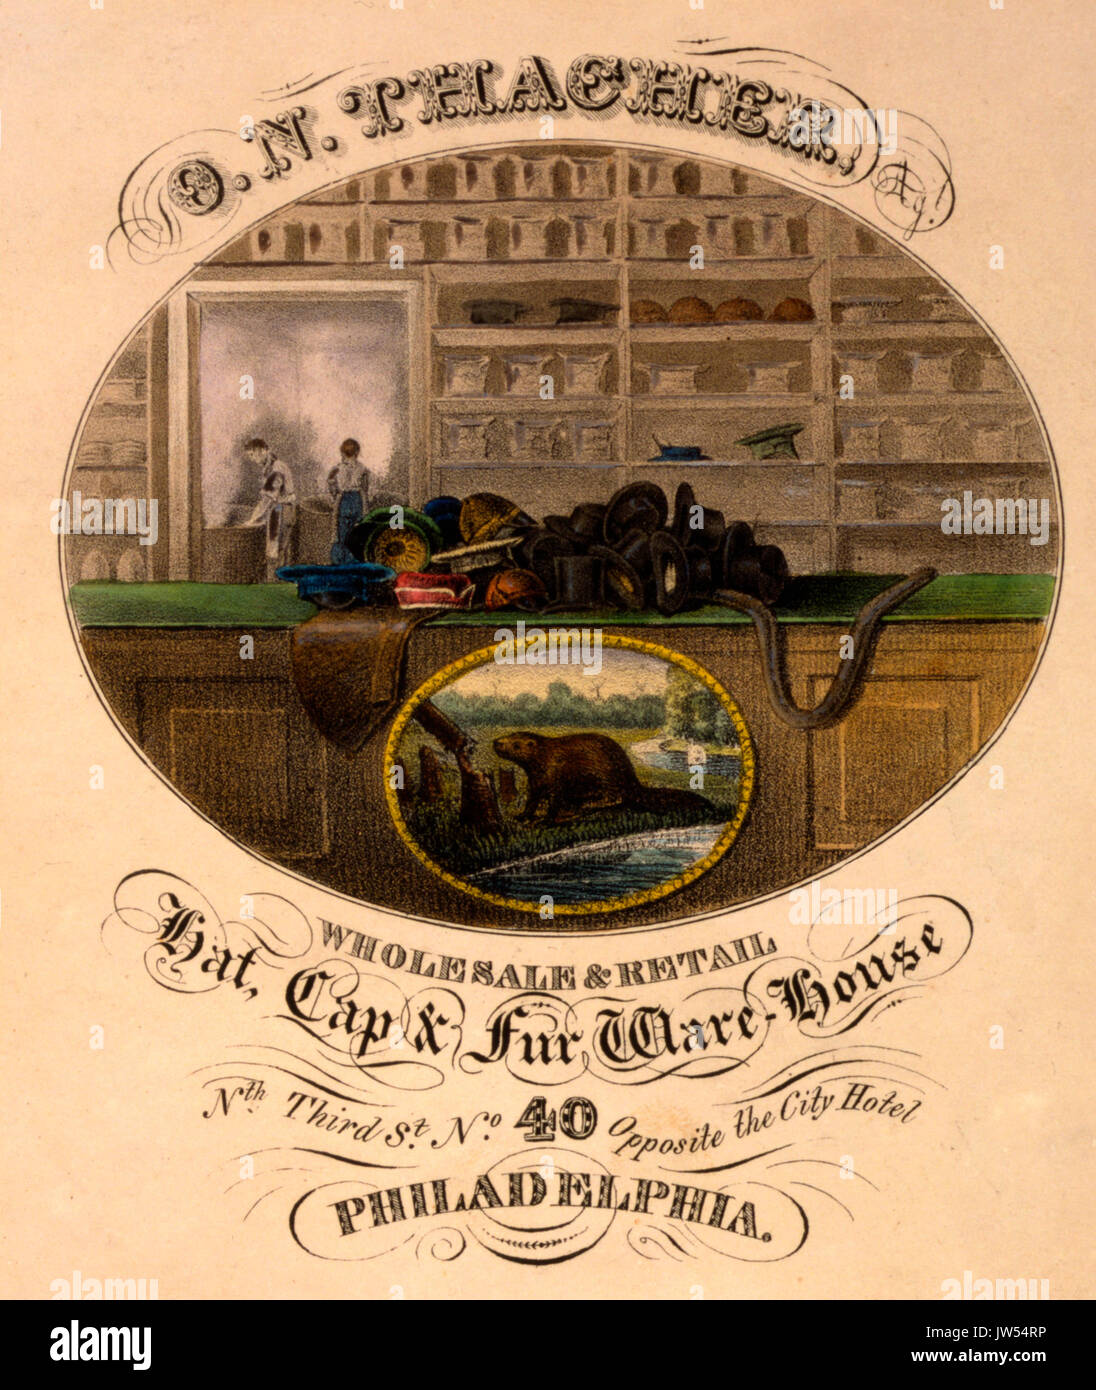 O.N. Thacher, Hat, Cap & Fur Ware-House Wholesale & retail -  Advertisement for Thacher's establishment at Nth. Third St., No. 40, opposite the City Hotel, Philadelphia, showing interior view of shop with hats piled on a counter and on shelves, an image of a beaver felling a tree, and through a doorway, a view of the hat-making operation. Advertisement, circa 1840 Stock Photo